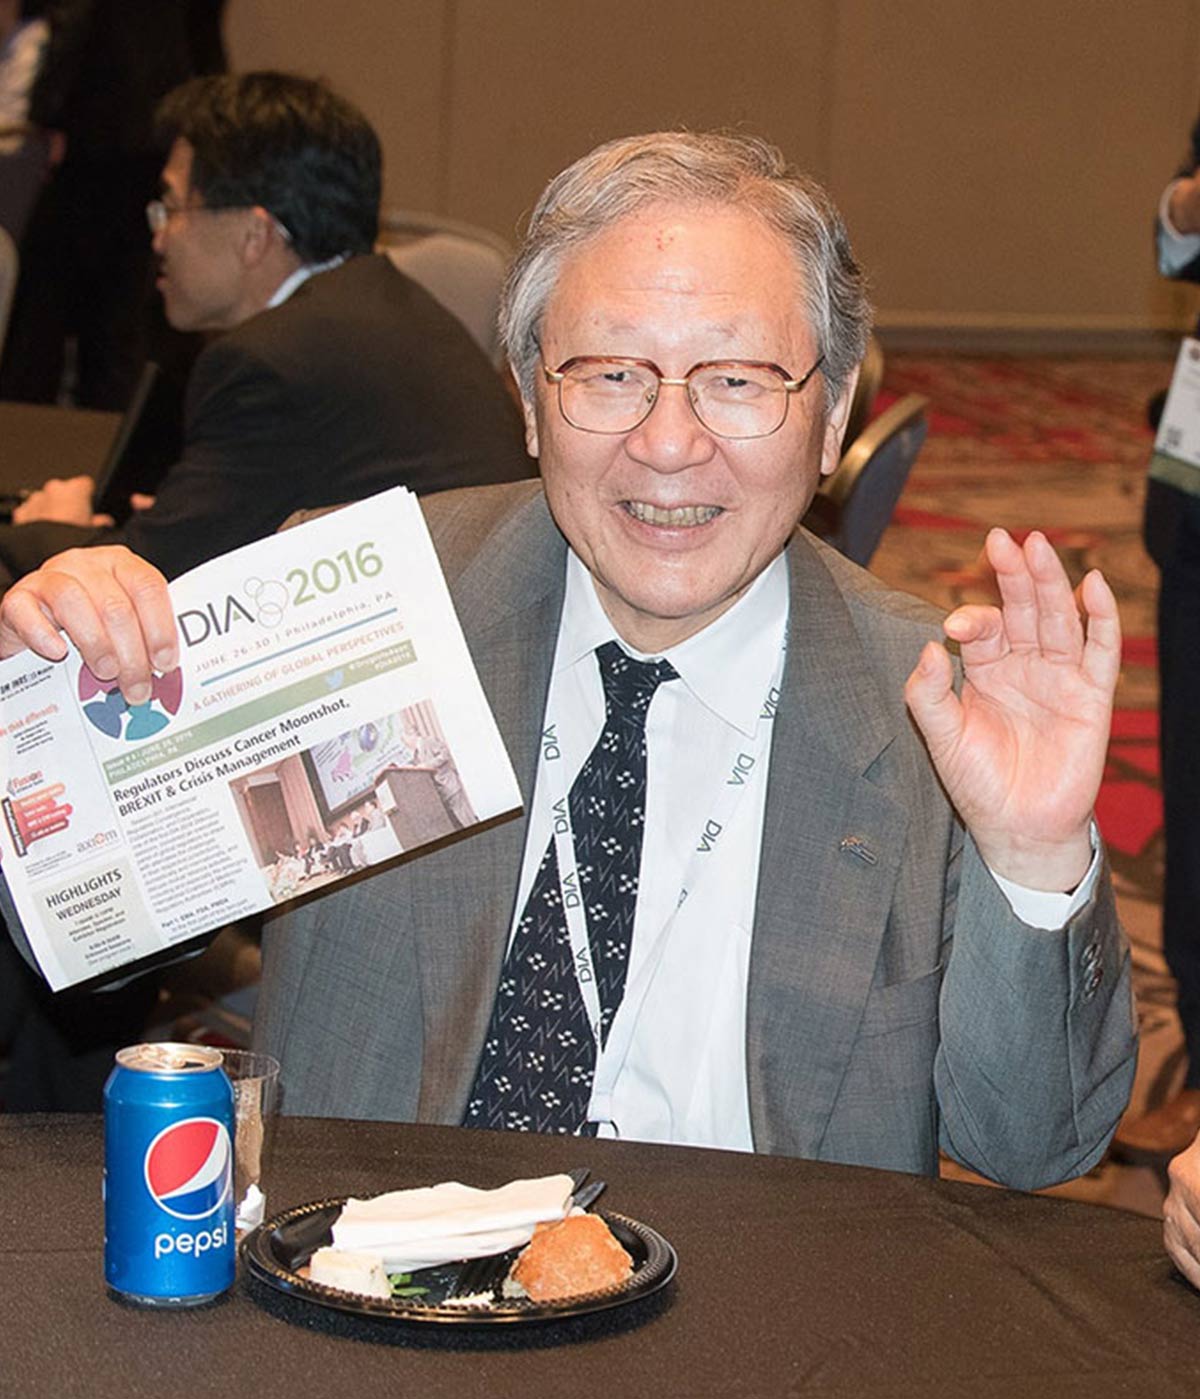 Dr. Tatsuya Kondo at the DIA Awards smiling and holding a DIA newsletter